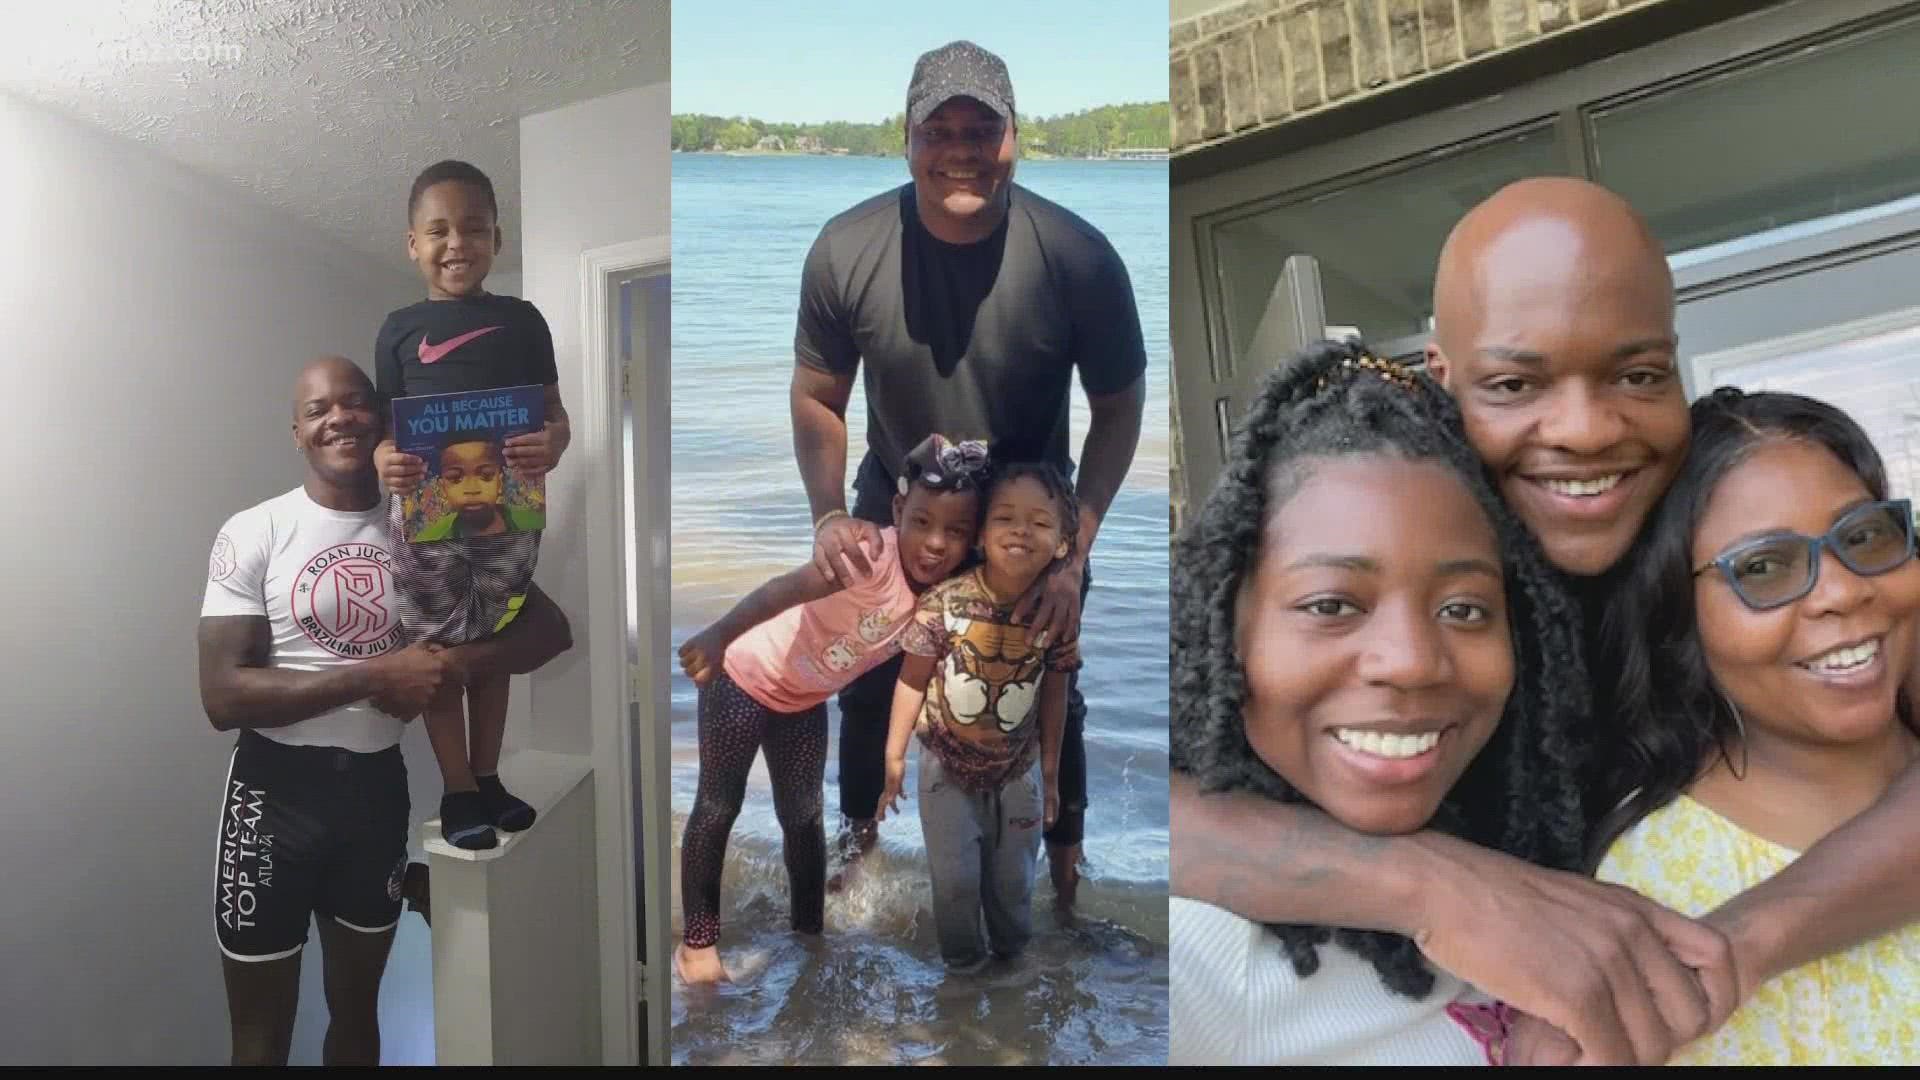 The family of Rogers Kyaruzi says the Georgia Bureau of Investigation told them they'd have to wait 90 days for an update on this case, but that's come and gone.